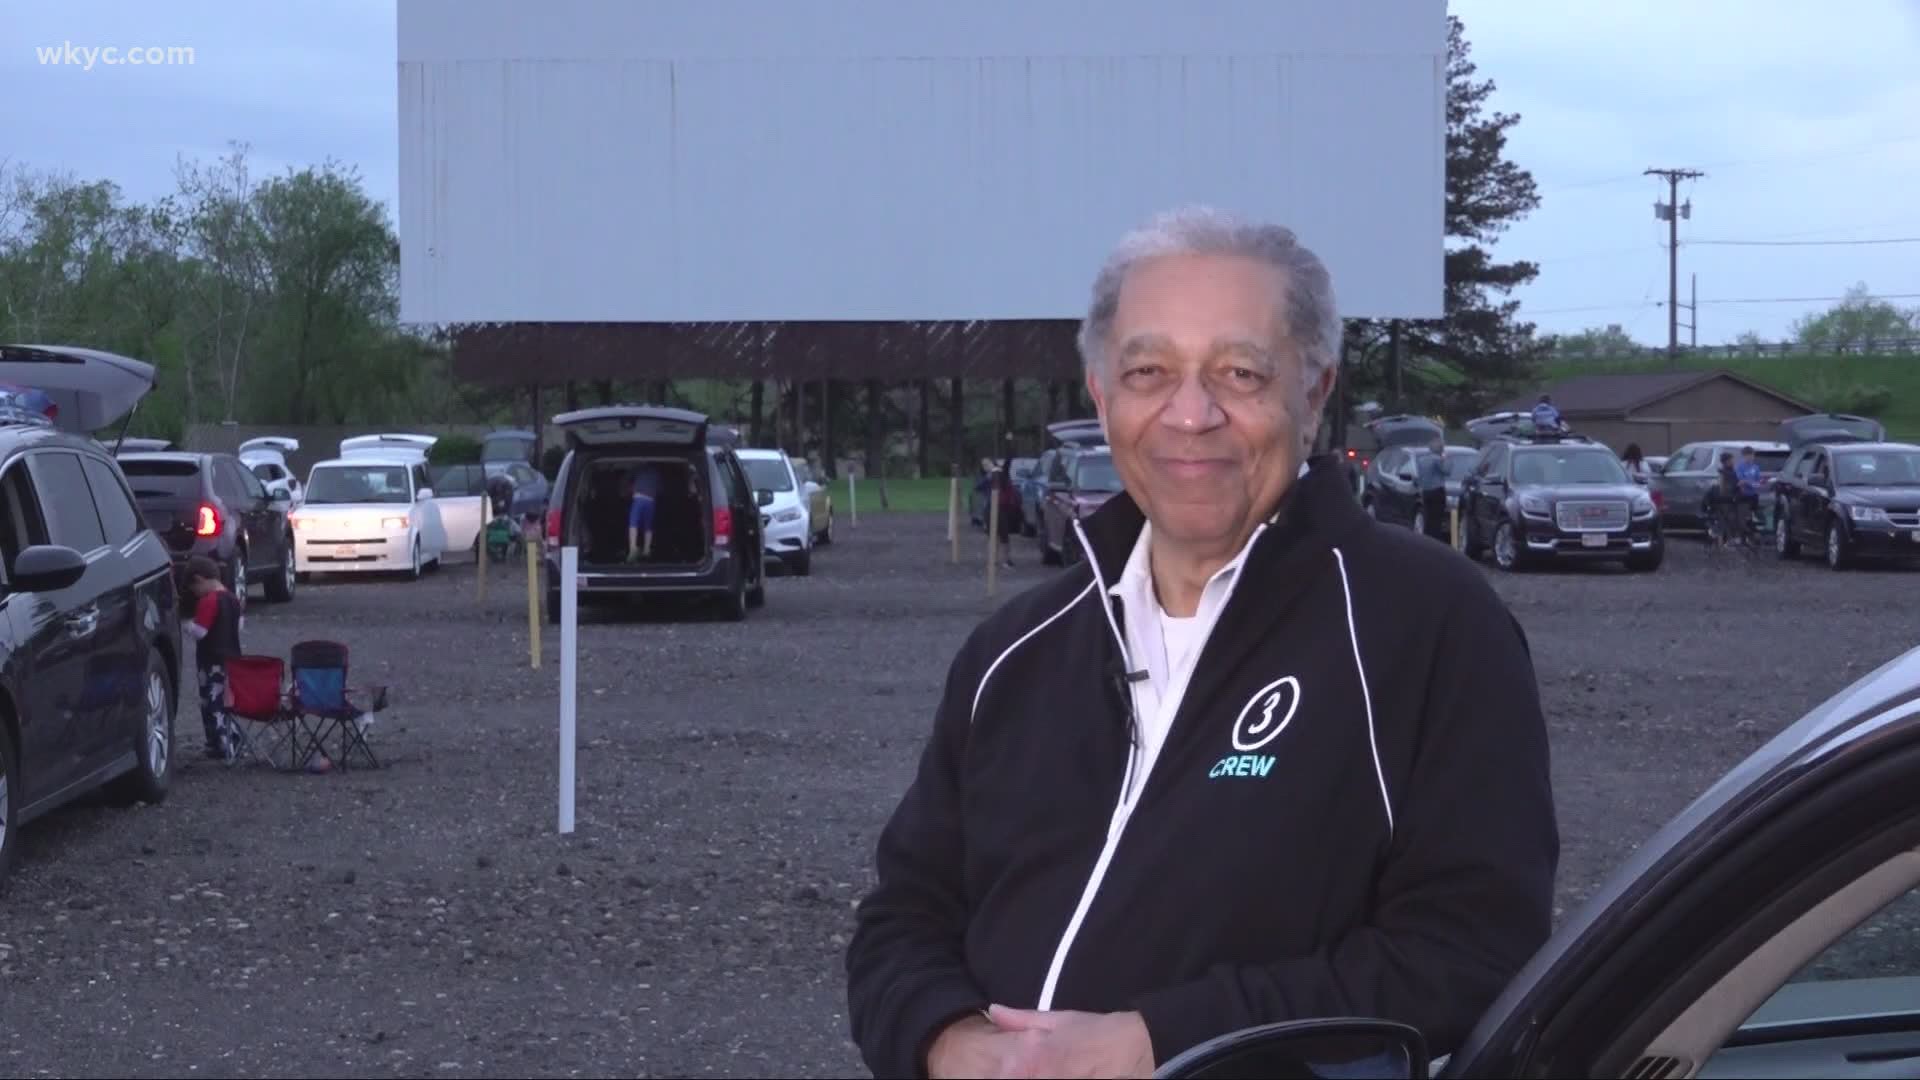 It's another example of nostalgia in the age of Coronavirus. Drive-ins are seeing interest and ticket sales are soaring.